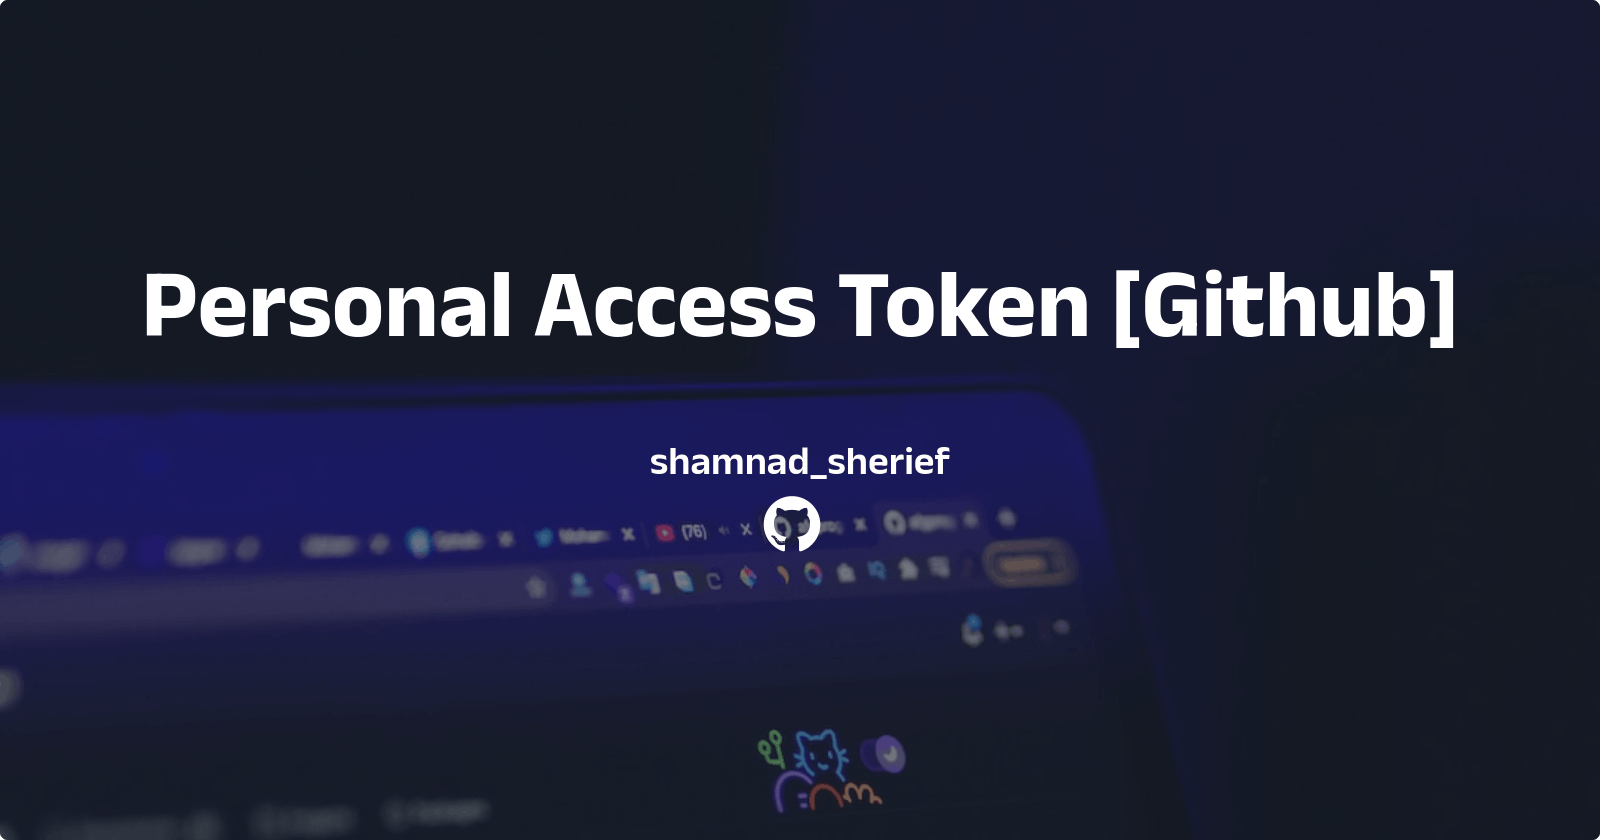 How to create Personal Access Token in Github